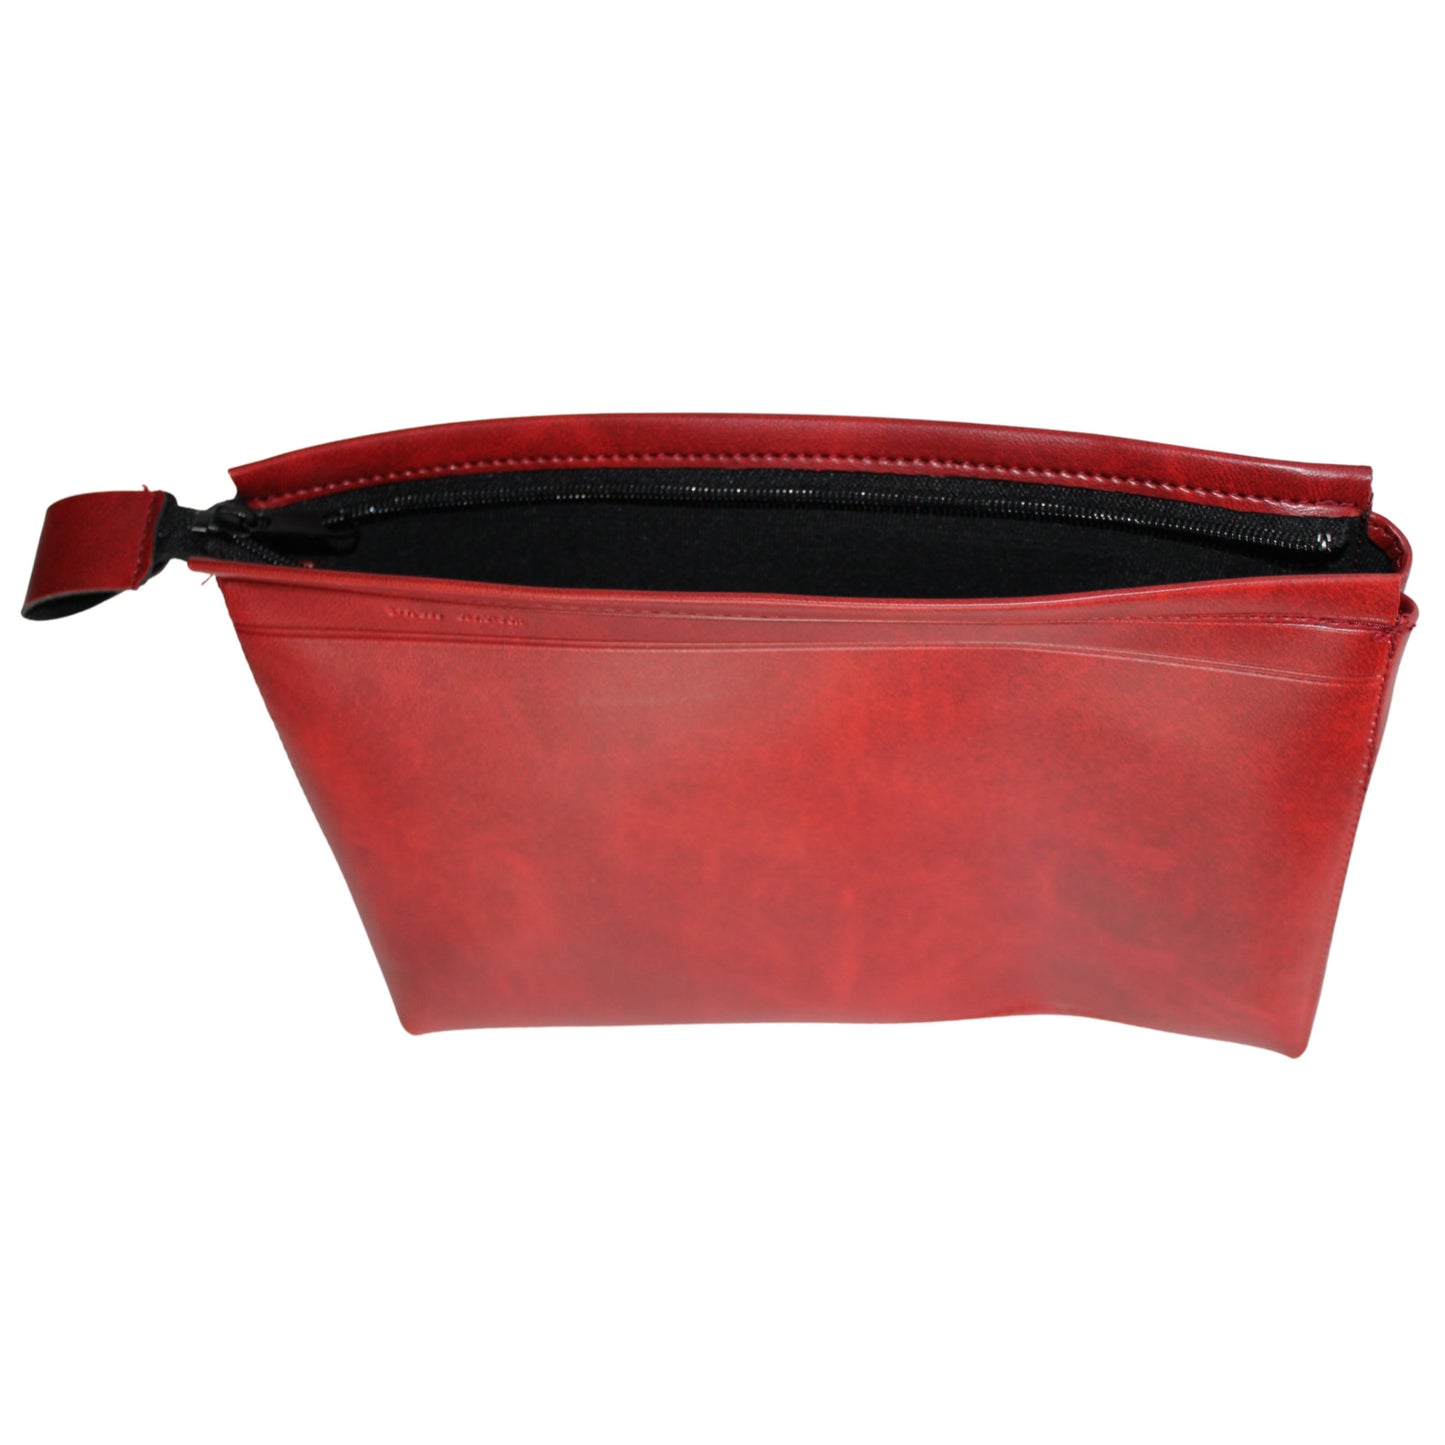 Deep bank bag with 2 inner compartments